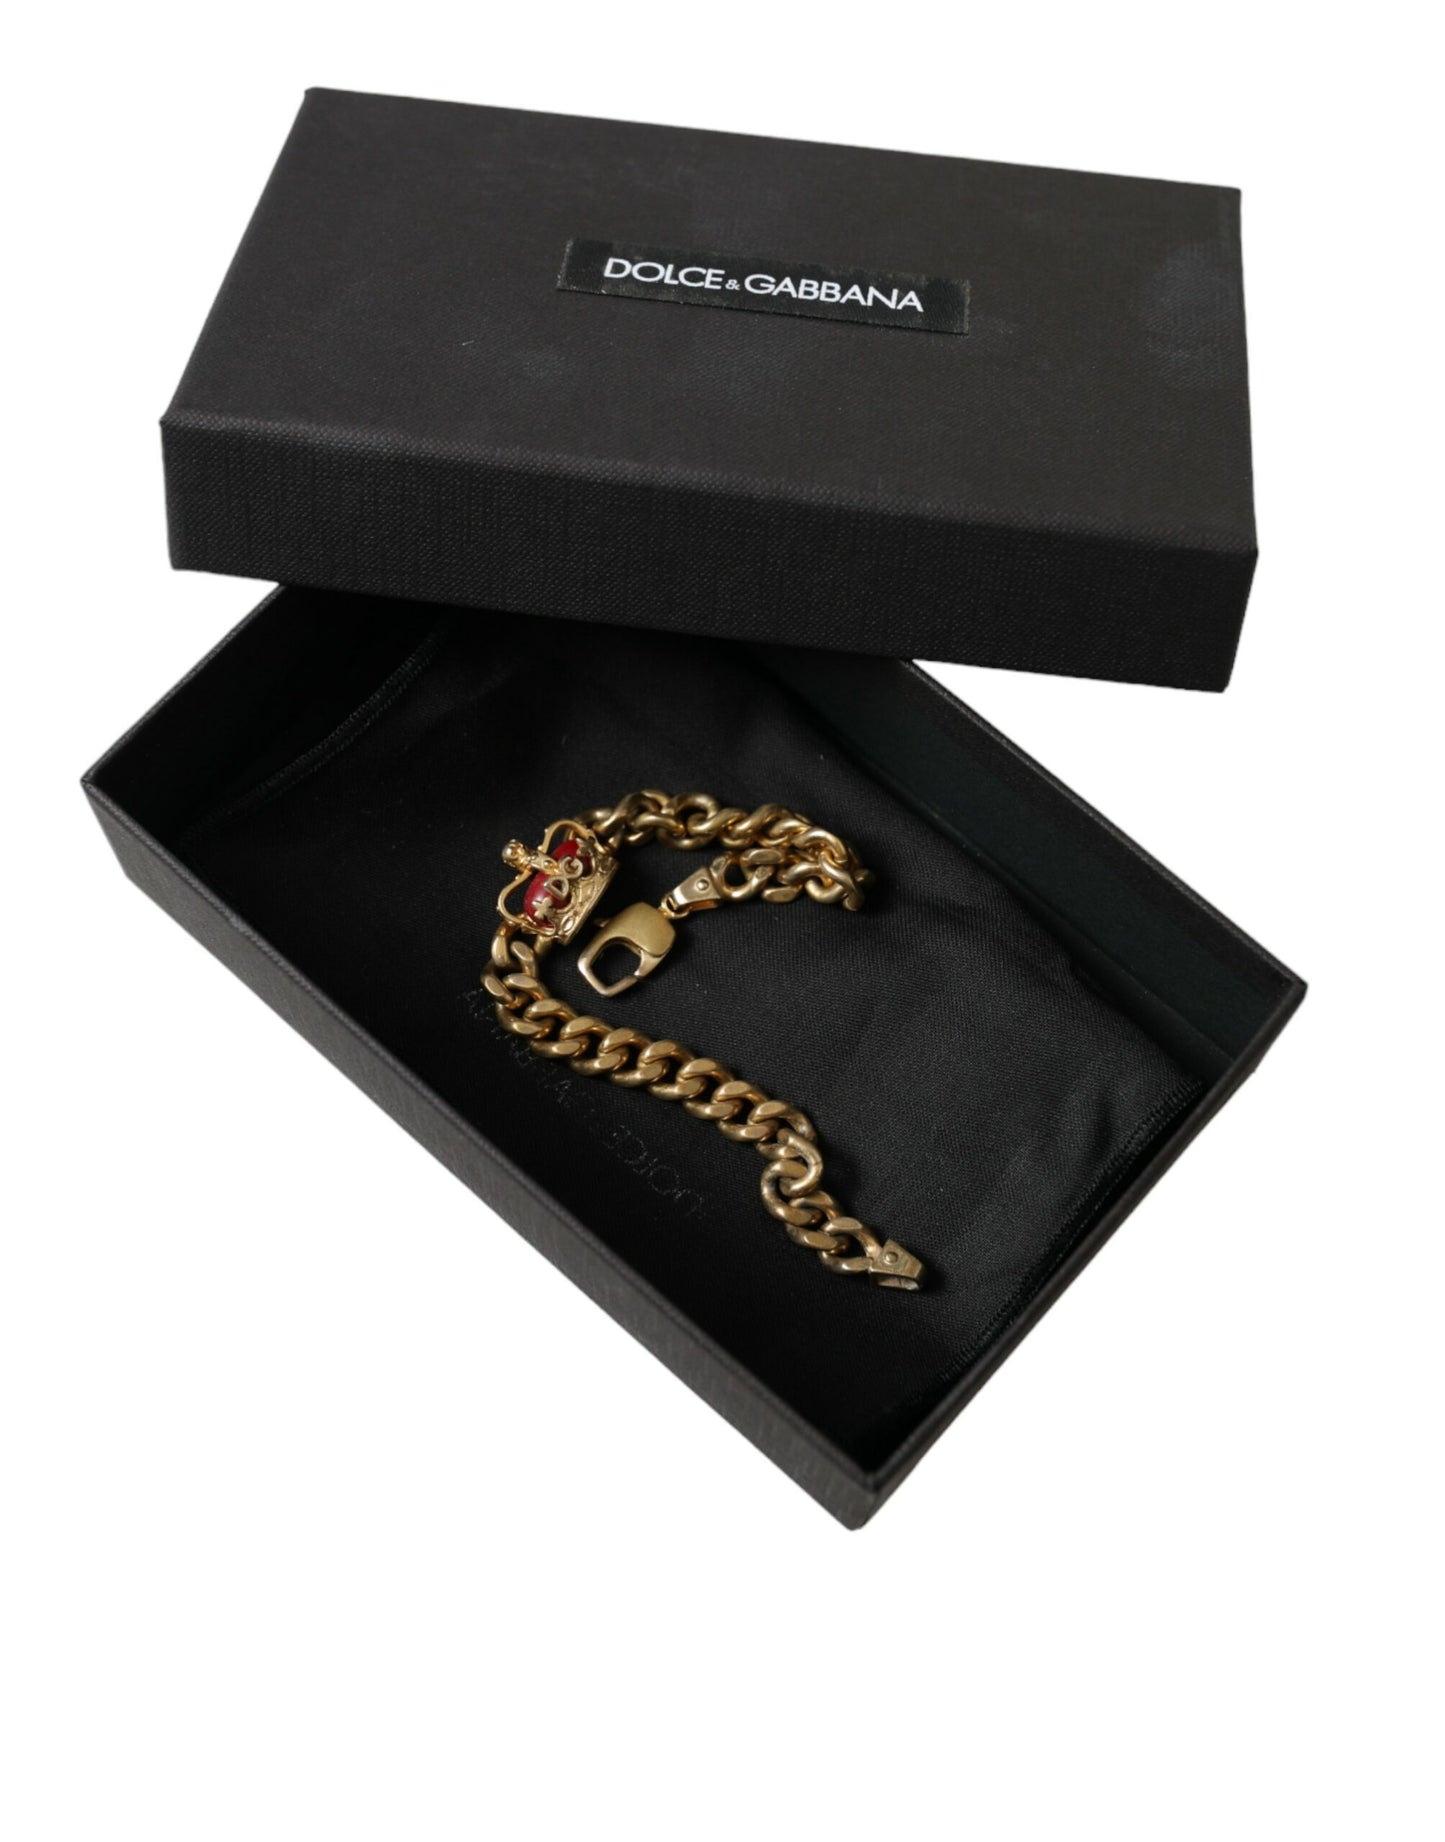 Dolce & Gabbana Opulent Gold-Tone Chain Bracelet with Red Accents